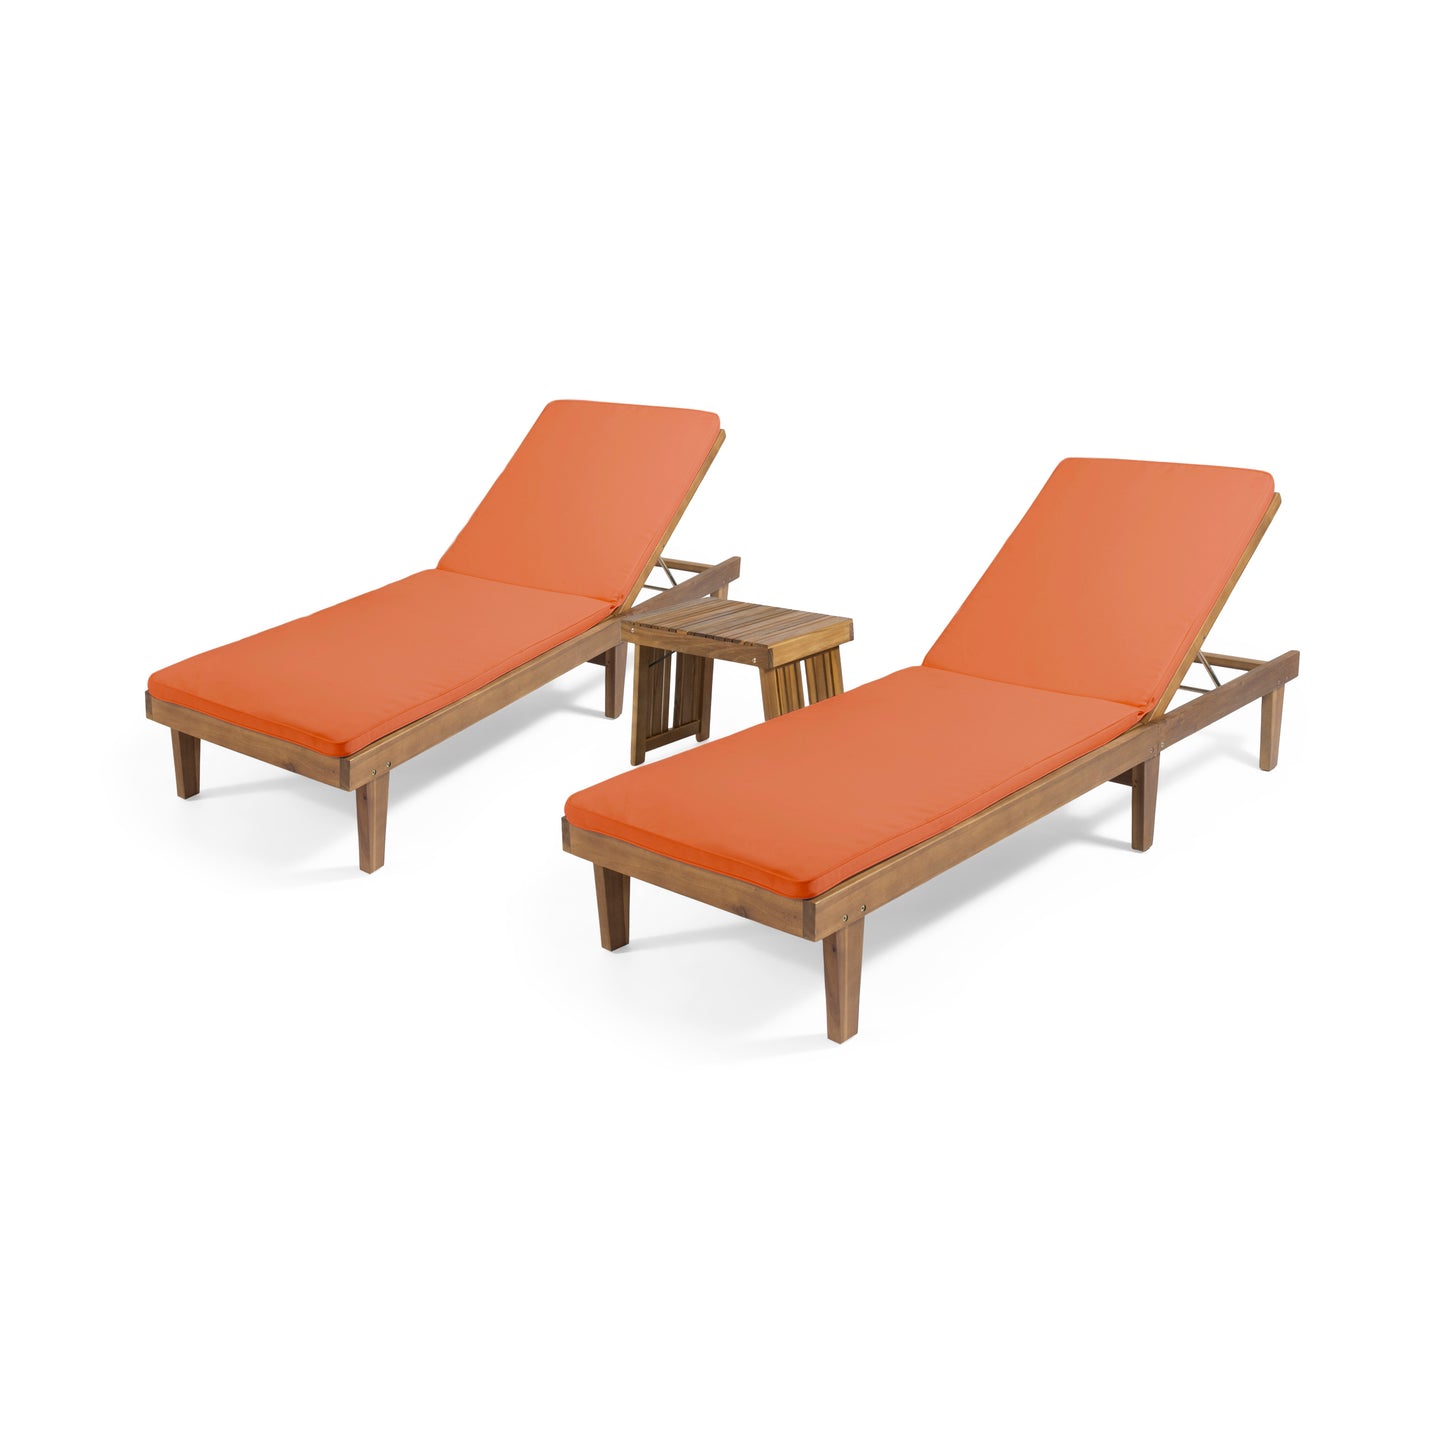 Addisyn Outdoor Acacia Wood 3 Piece Chaise Lounge Set with Water-Resistant Cushions